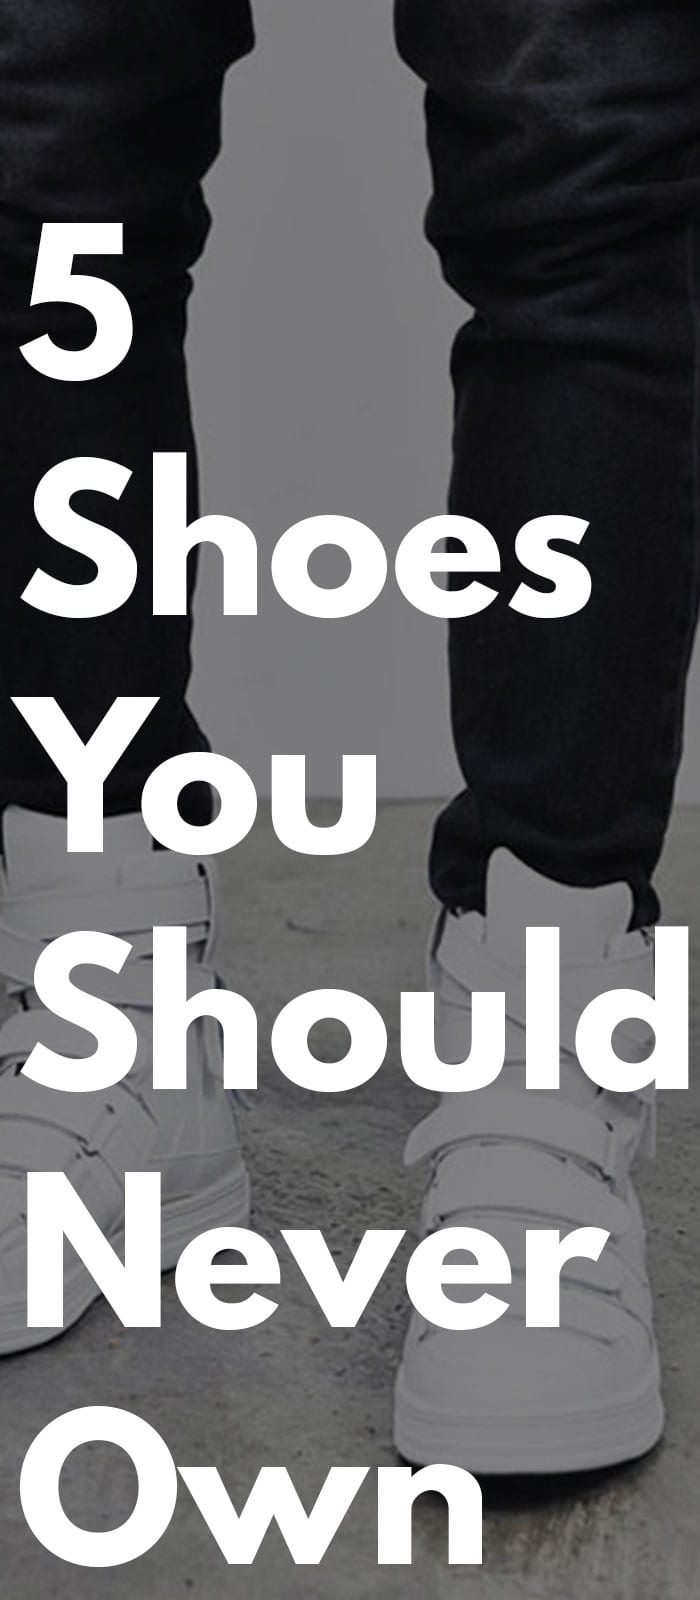 5 Shoes You Should Never have